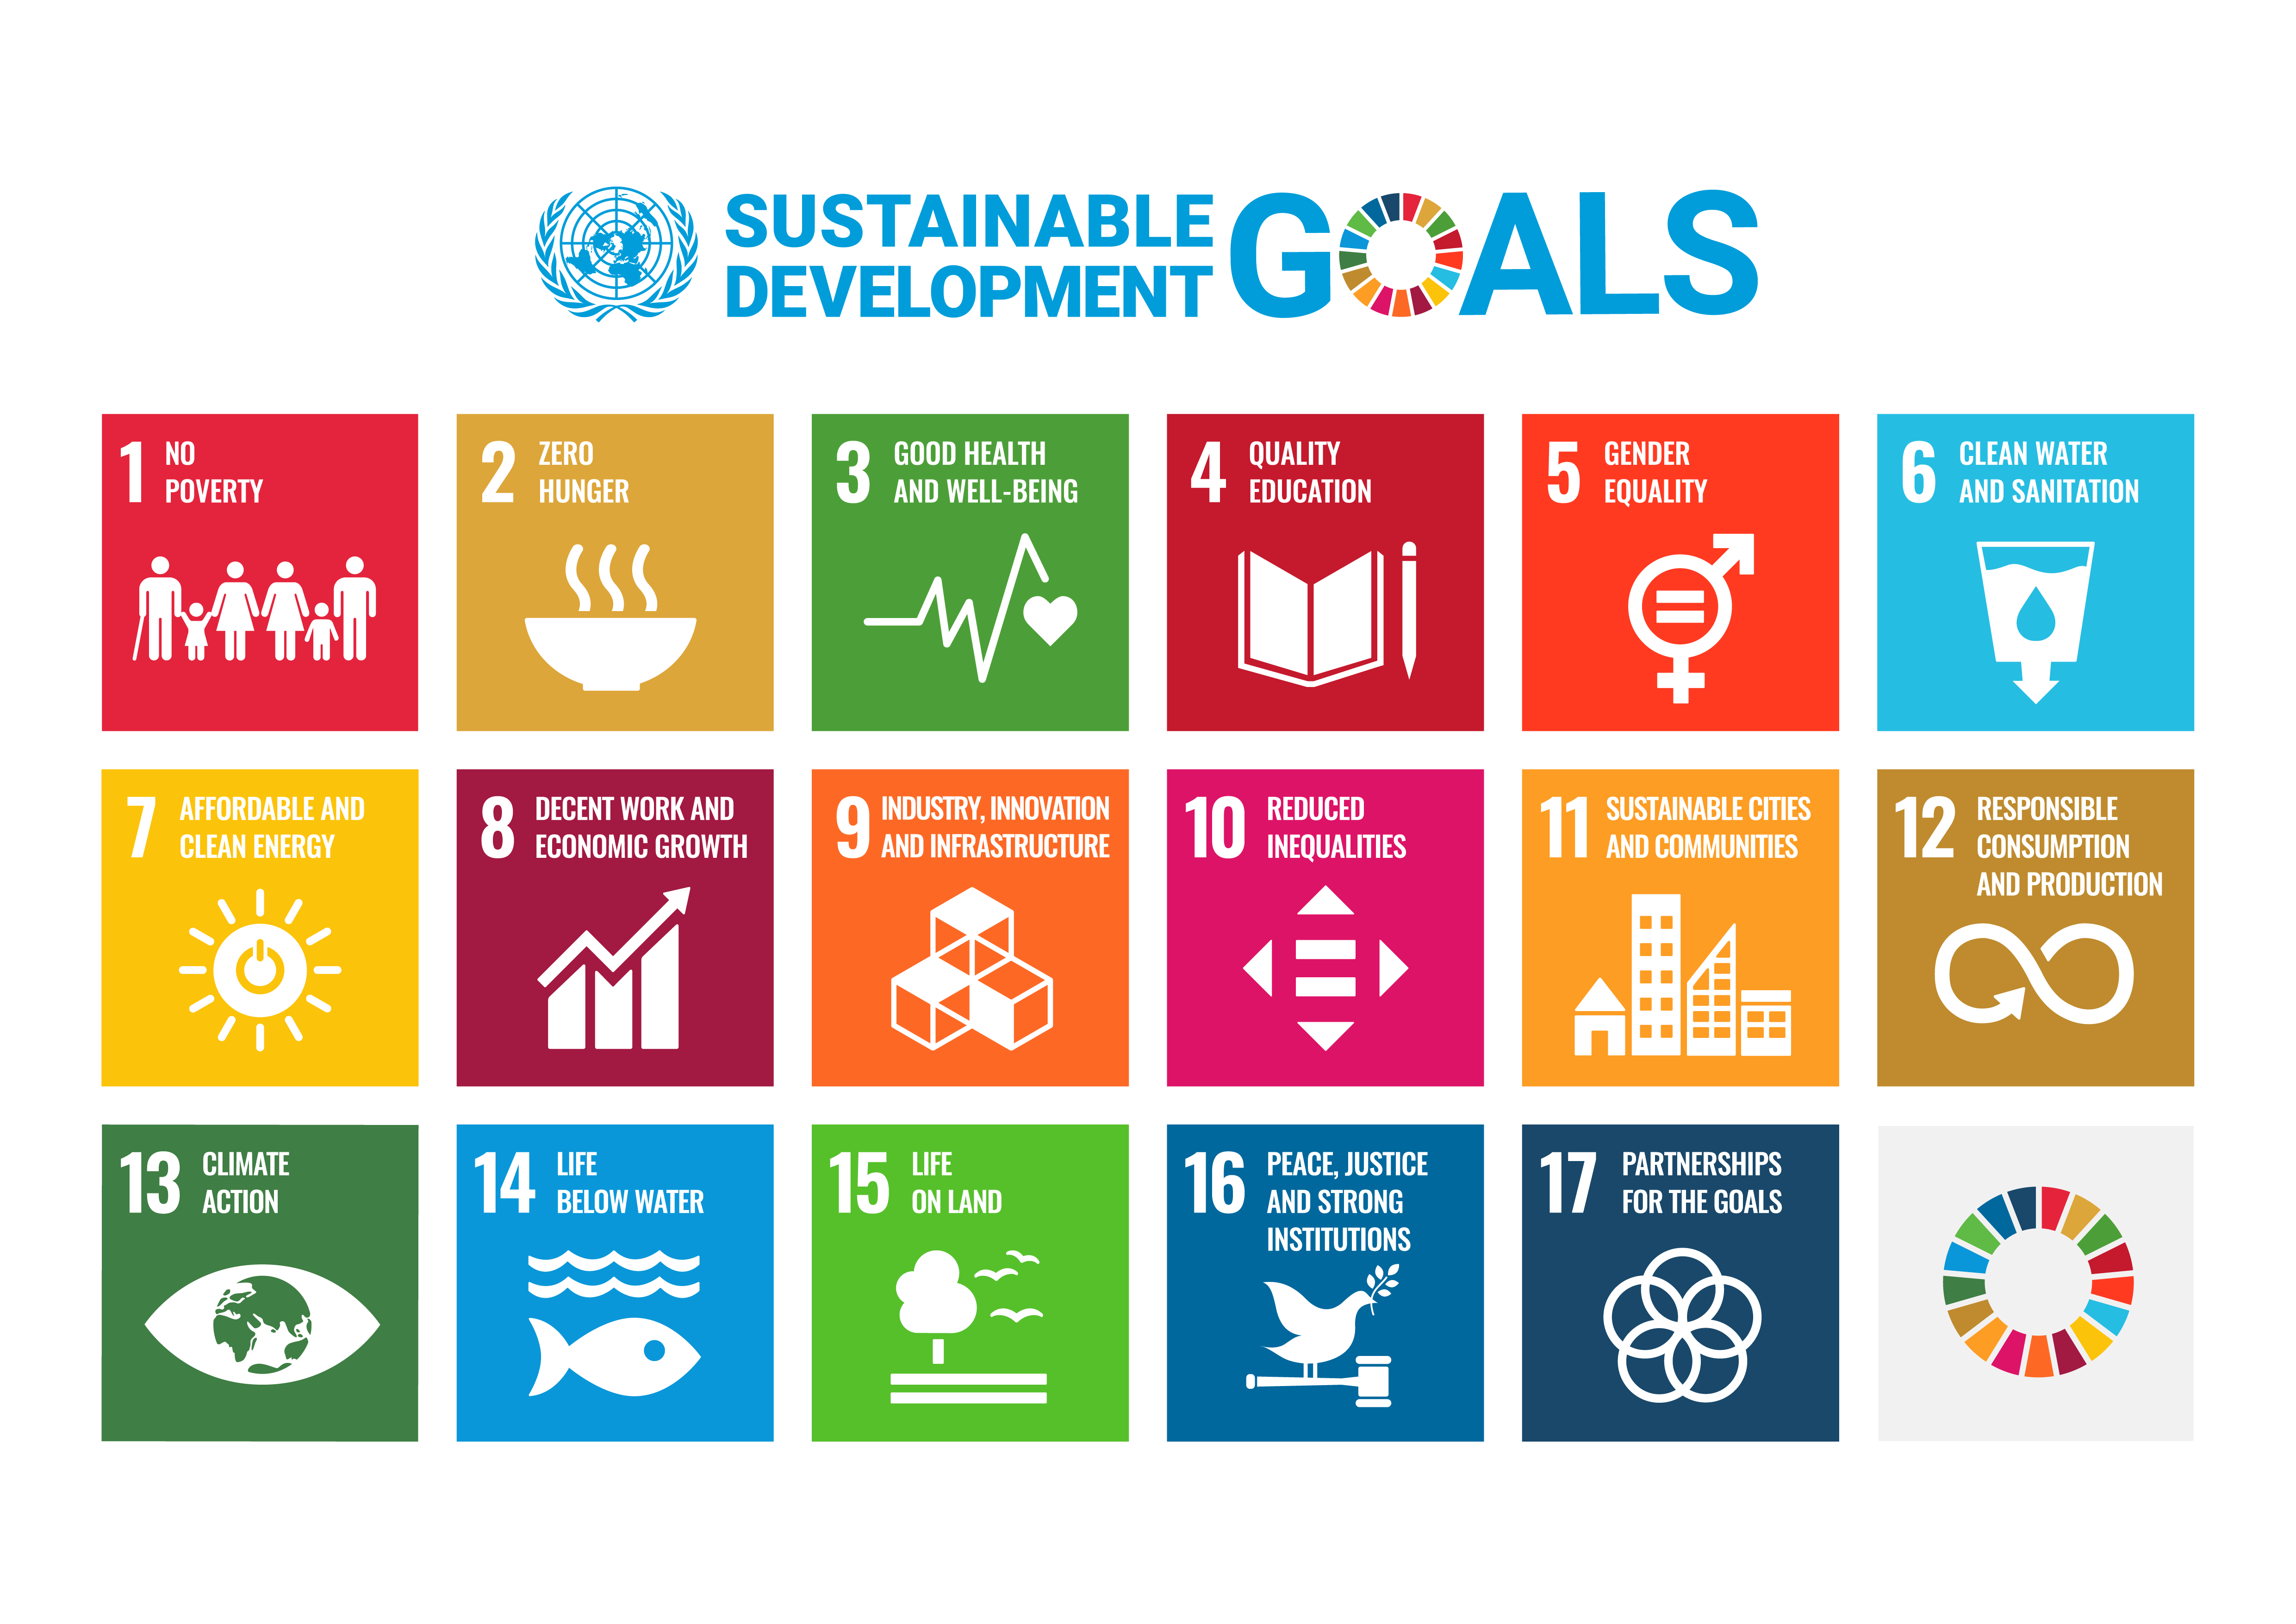 The Sustainable Development Goals (SDG) are the blueprint to achieve a better and more sustainable future for all. They address the global challenges we face, including those related to poverty, inequality, climate change, environmental degradation, peace and justice. The 17 Goals are all interconnected, and in order to leave no one behind, it is important that we achieve them all by 2030